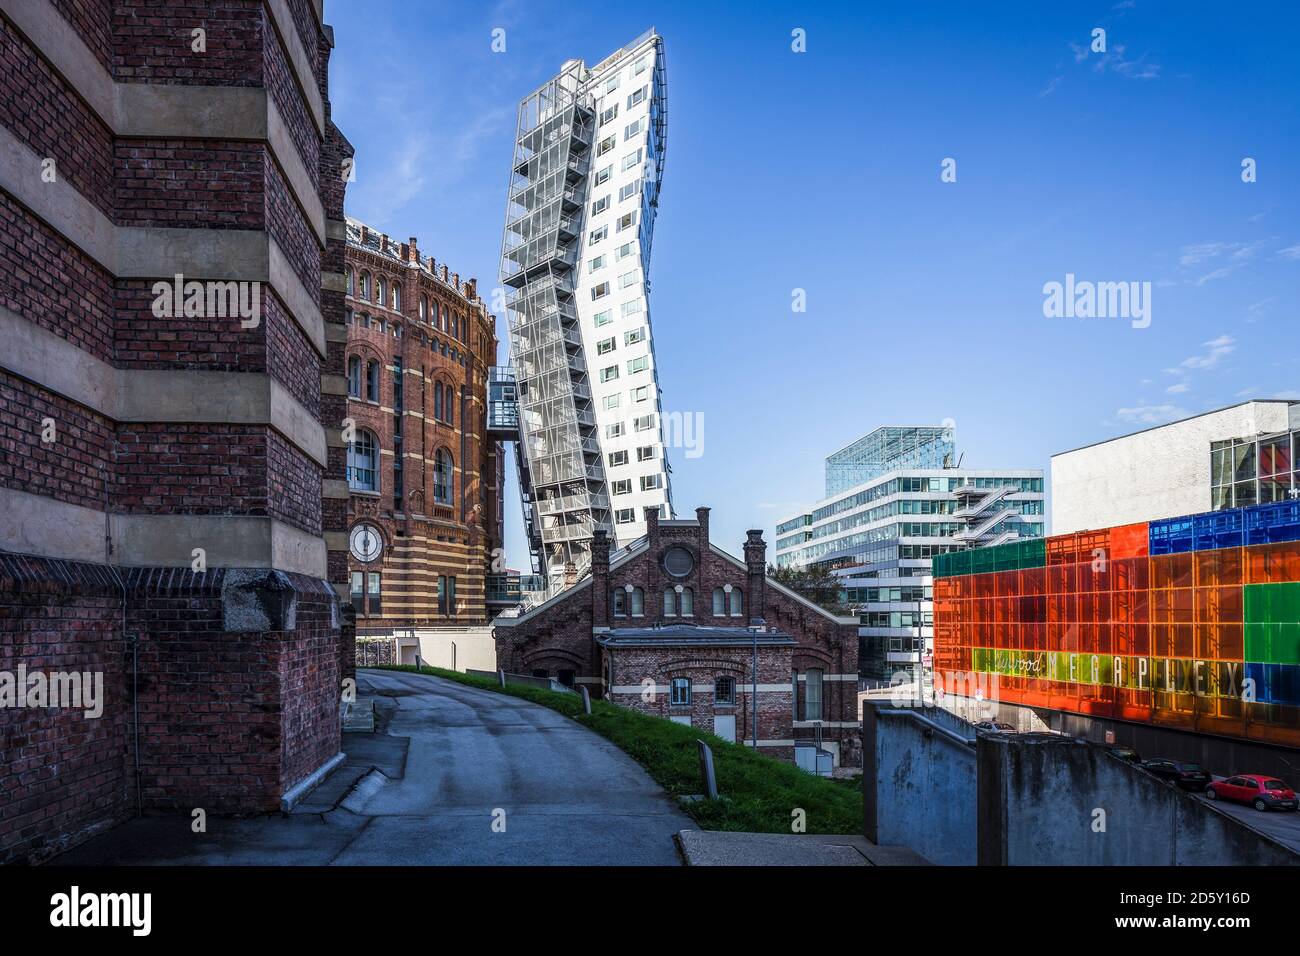 Austria, Vienna, view to gasometer and extension building Stock Photo